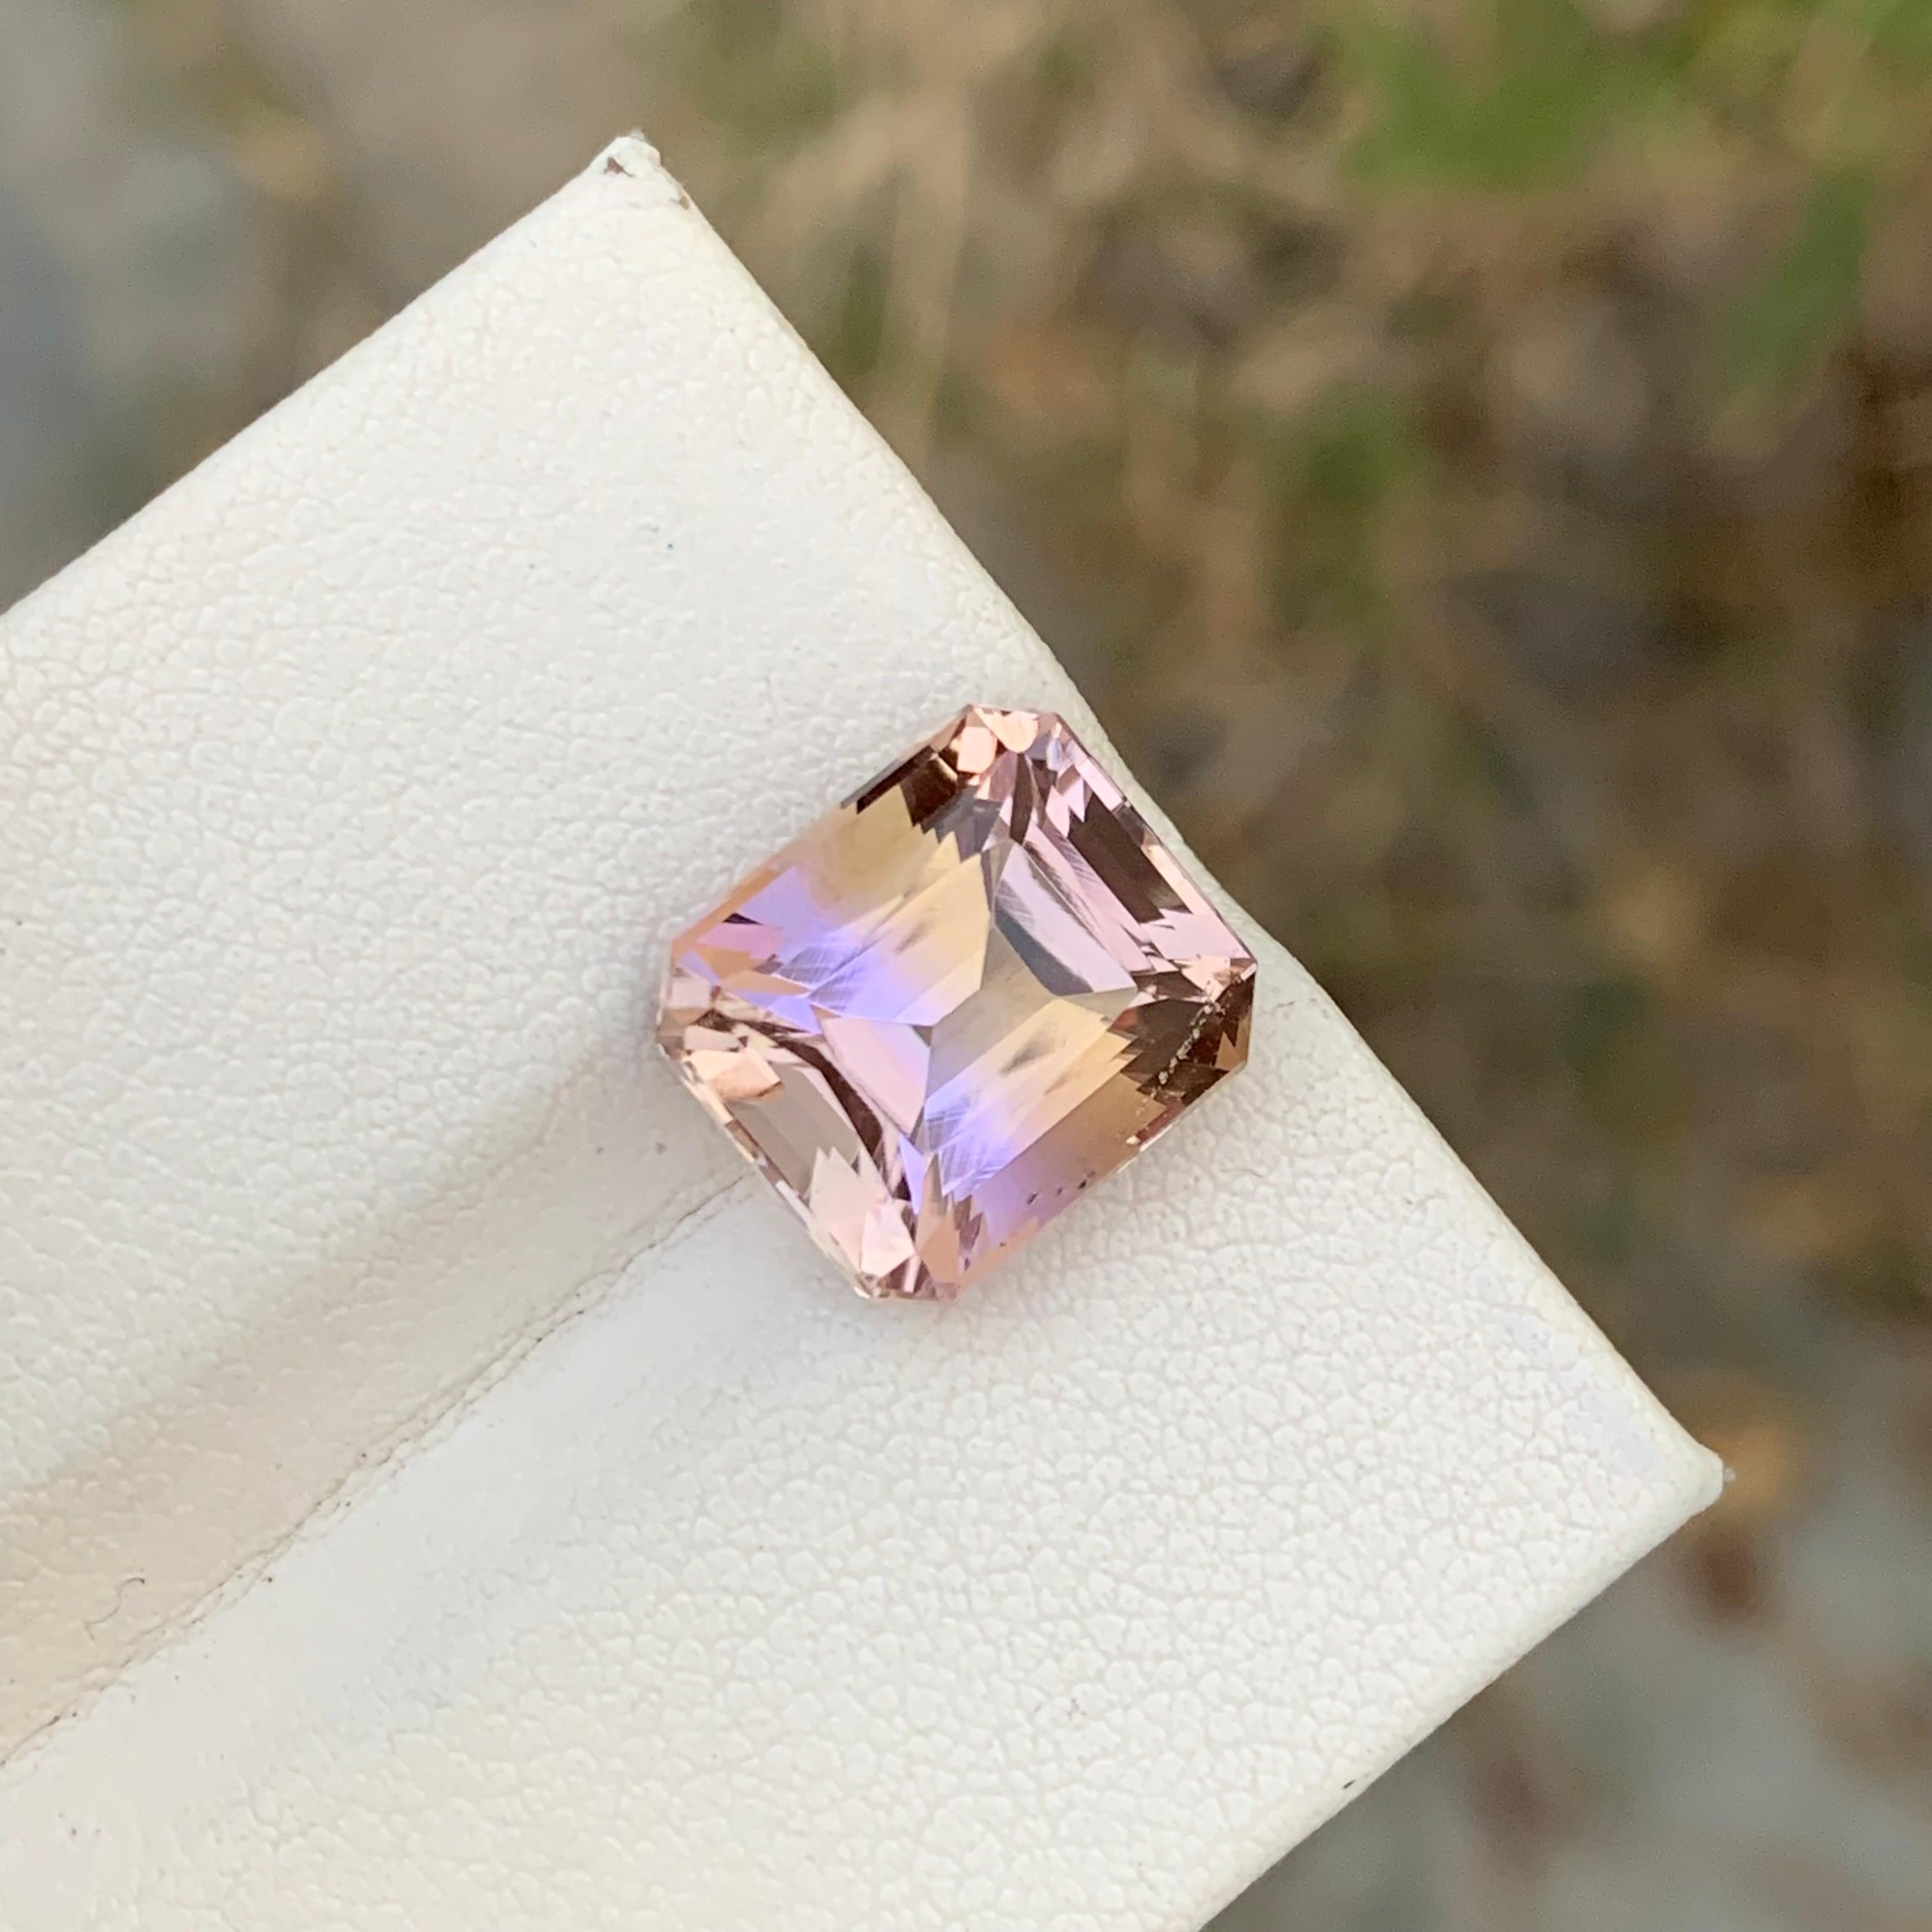 Natural loose Ametrine
Weight: 7.10 Carats 
Dimension: 12.2X10.8X8.2 Mm
Origin: Brazil
Shape: Emerald 
Color: Purple & Yellow
Treatment: Non
Certificate: On Client Demand
. 
Ametrine is a captivating gemstone that combines the vibrant purple hues of